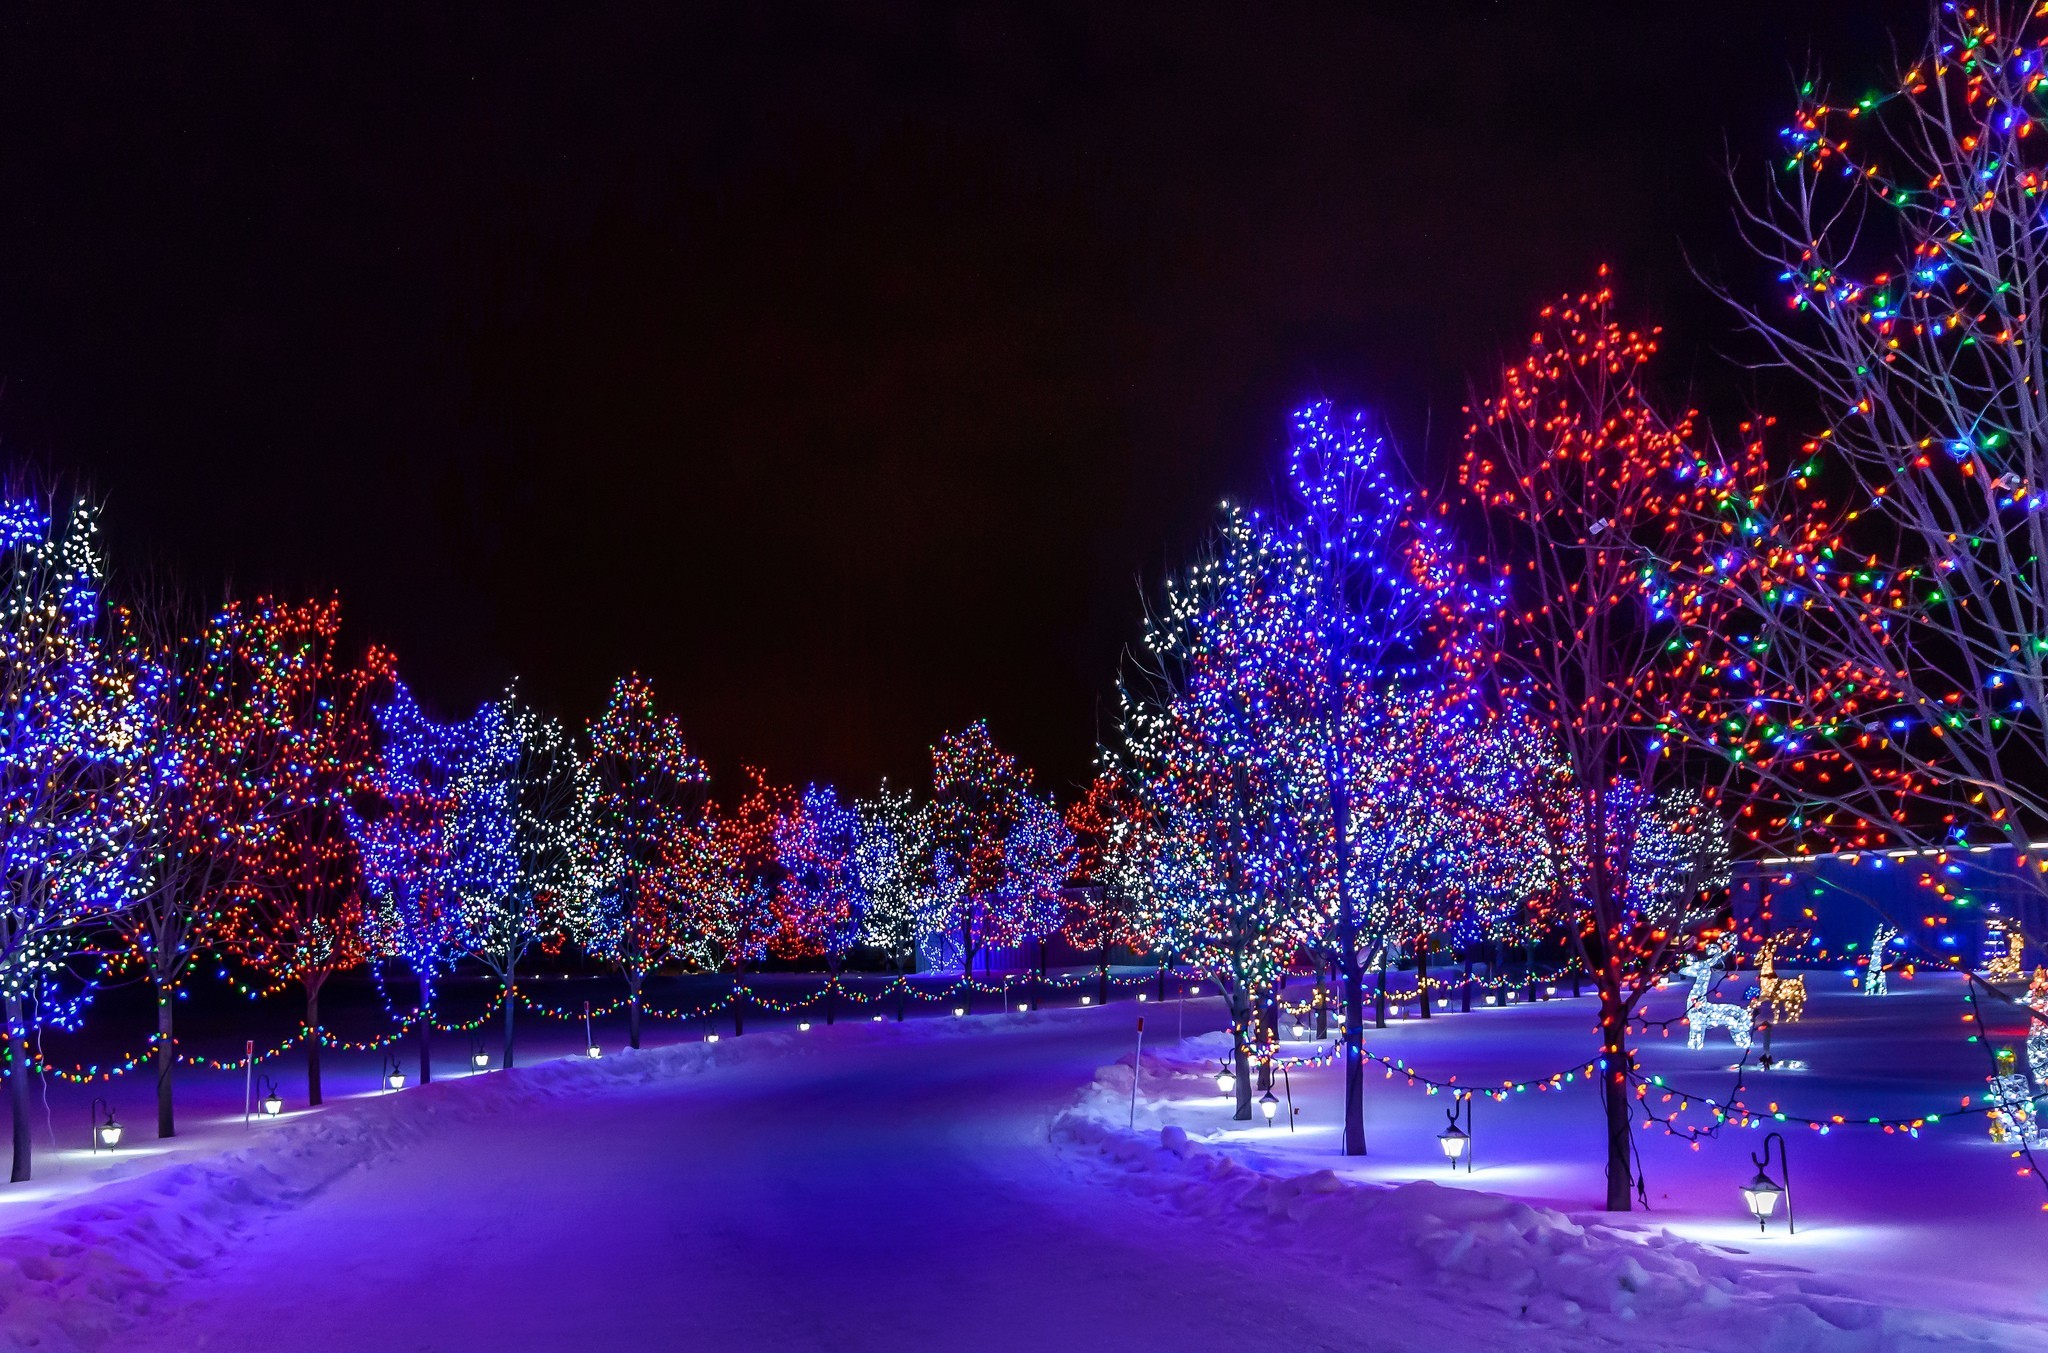 2048x1353 Winter Lights Lanterns Christmas Road Time Magic Merry Trees Snow Snowy Xmas  Night Forest Desktop Wallpapers